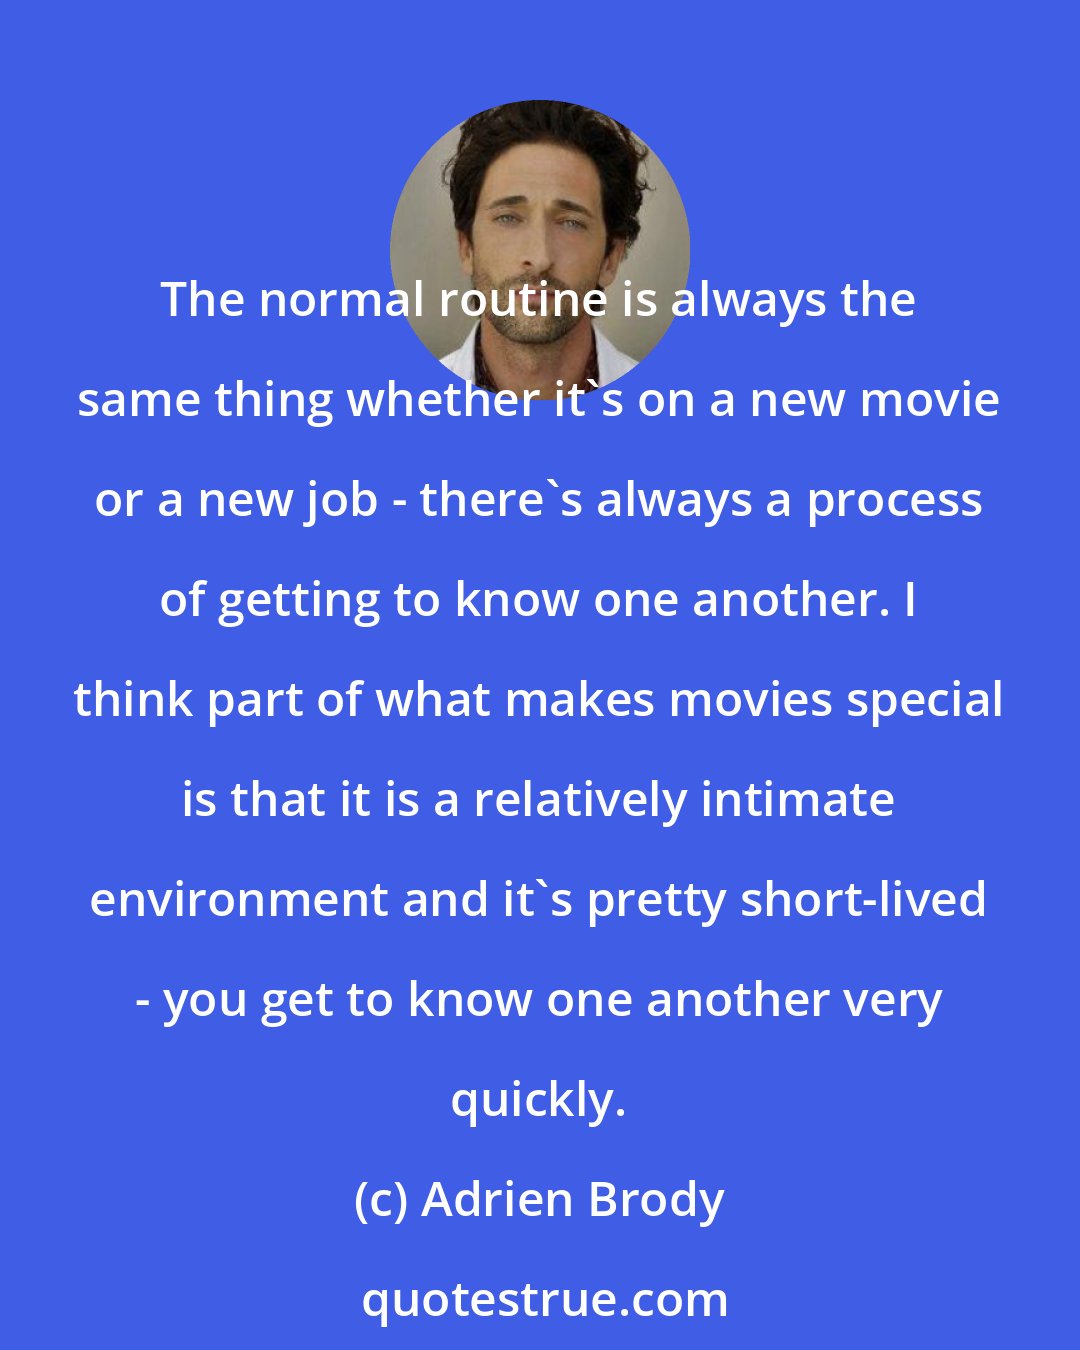 Adrien Brody: The normal routine is always the same thing whether it's on a new movie or a new job - there's always a process of getting to know one another. I think part of what makes movies special is that it is a relatively intimate environment and it's pretty short-lived - you get to know one another very quickly.